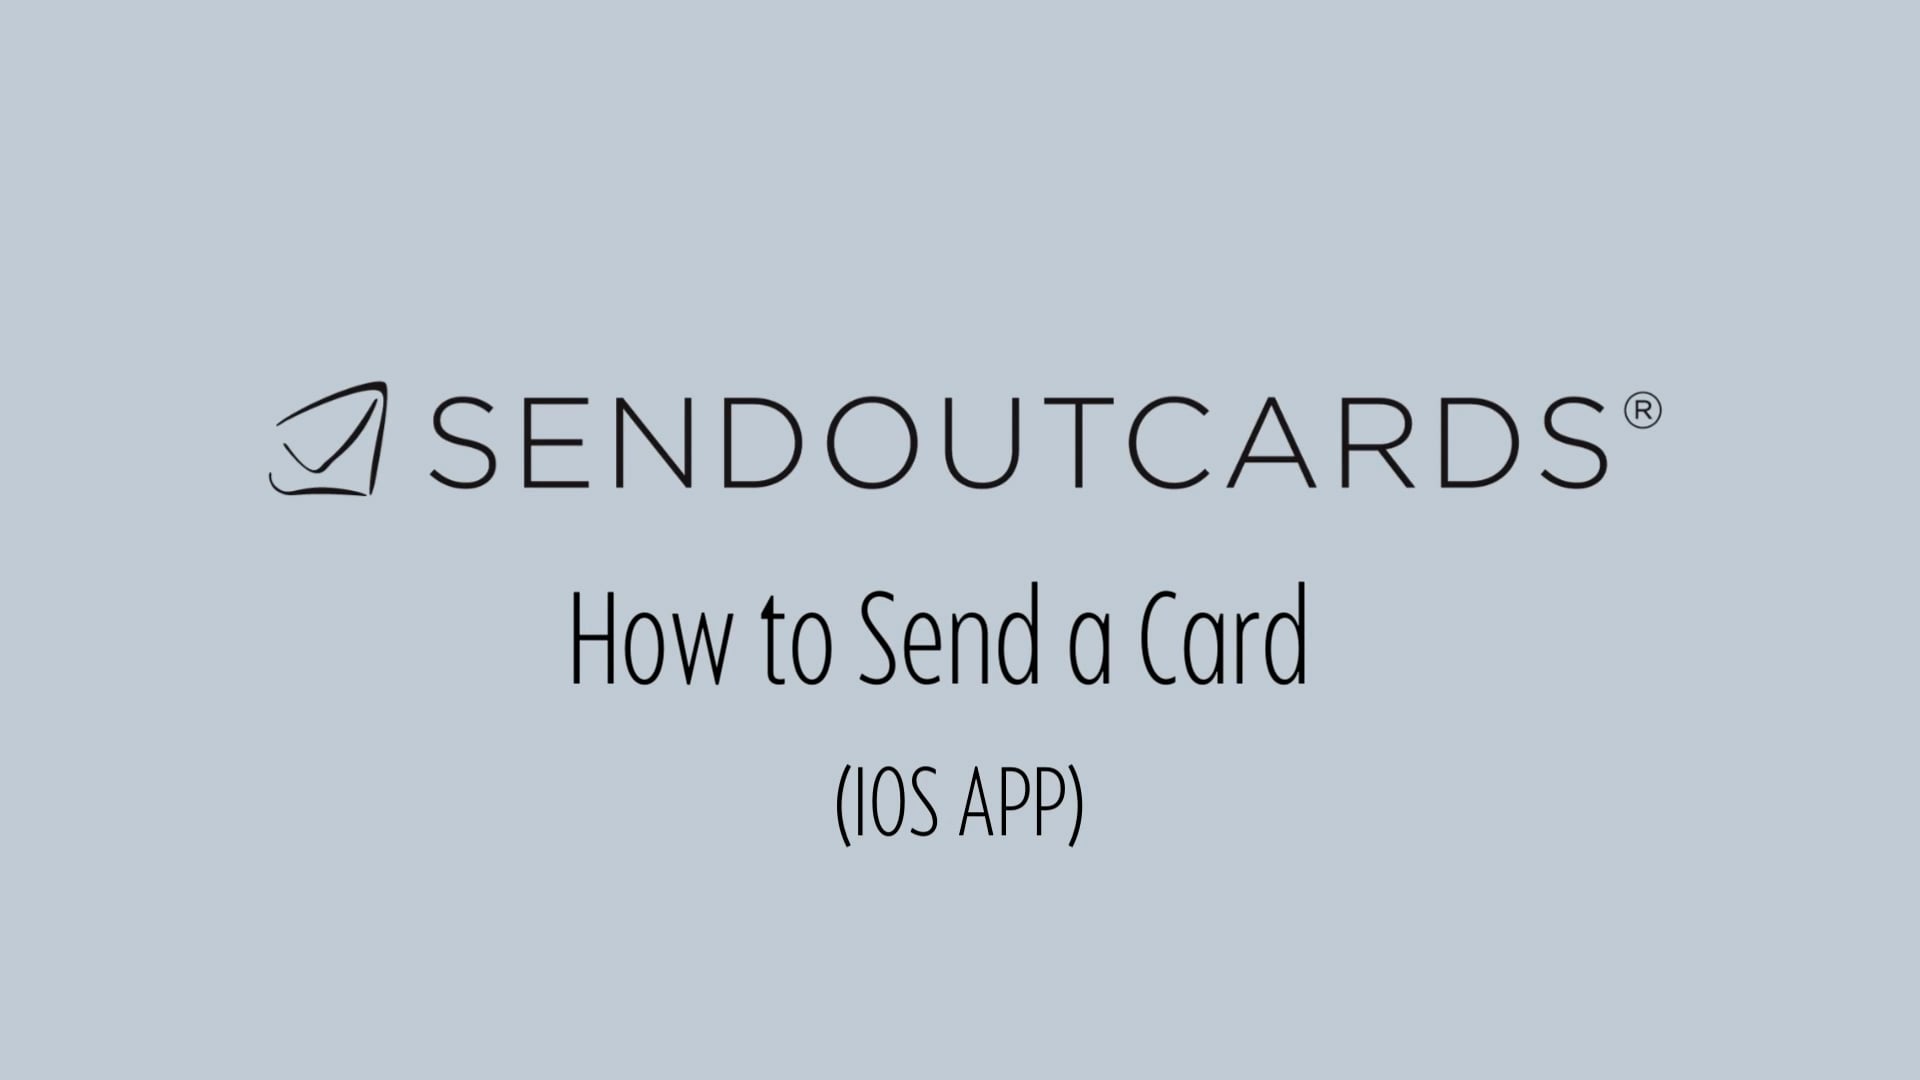 Watch this video - How to Send a Card iOS App